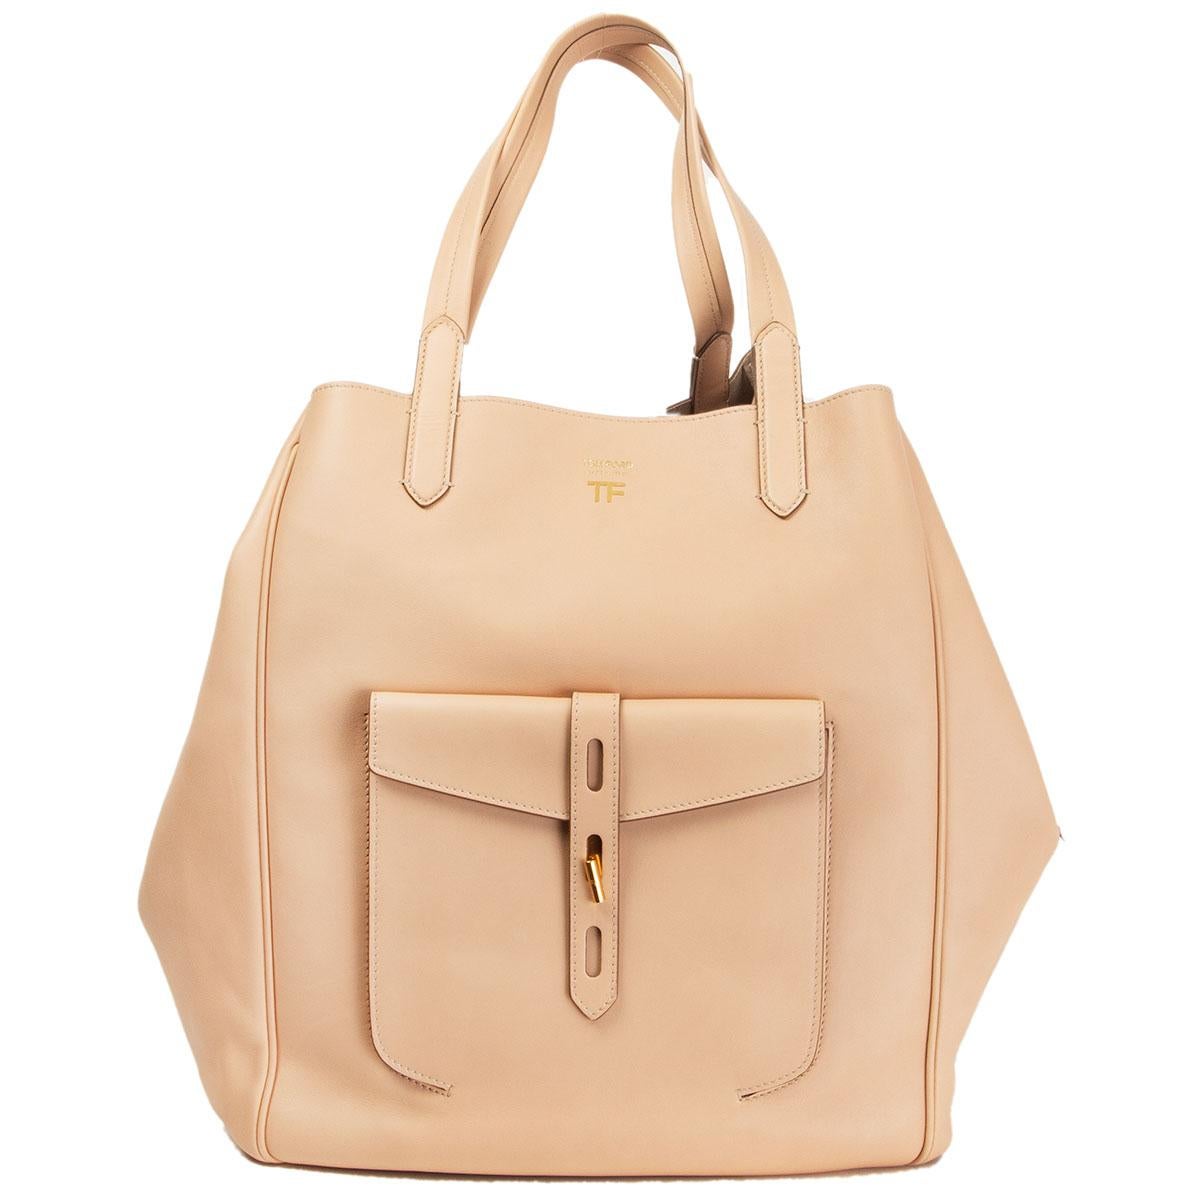 Tom Ford 'Hollywood Large Tote' bag in Oat (nude) soft smooth calf leather. Spring 2019 runway bag. Outside flap pocket. Closes with a strap and twist lock on top. Unlined with two open pockets and a zipper pocket against the back. Has been carried